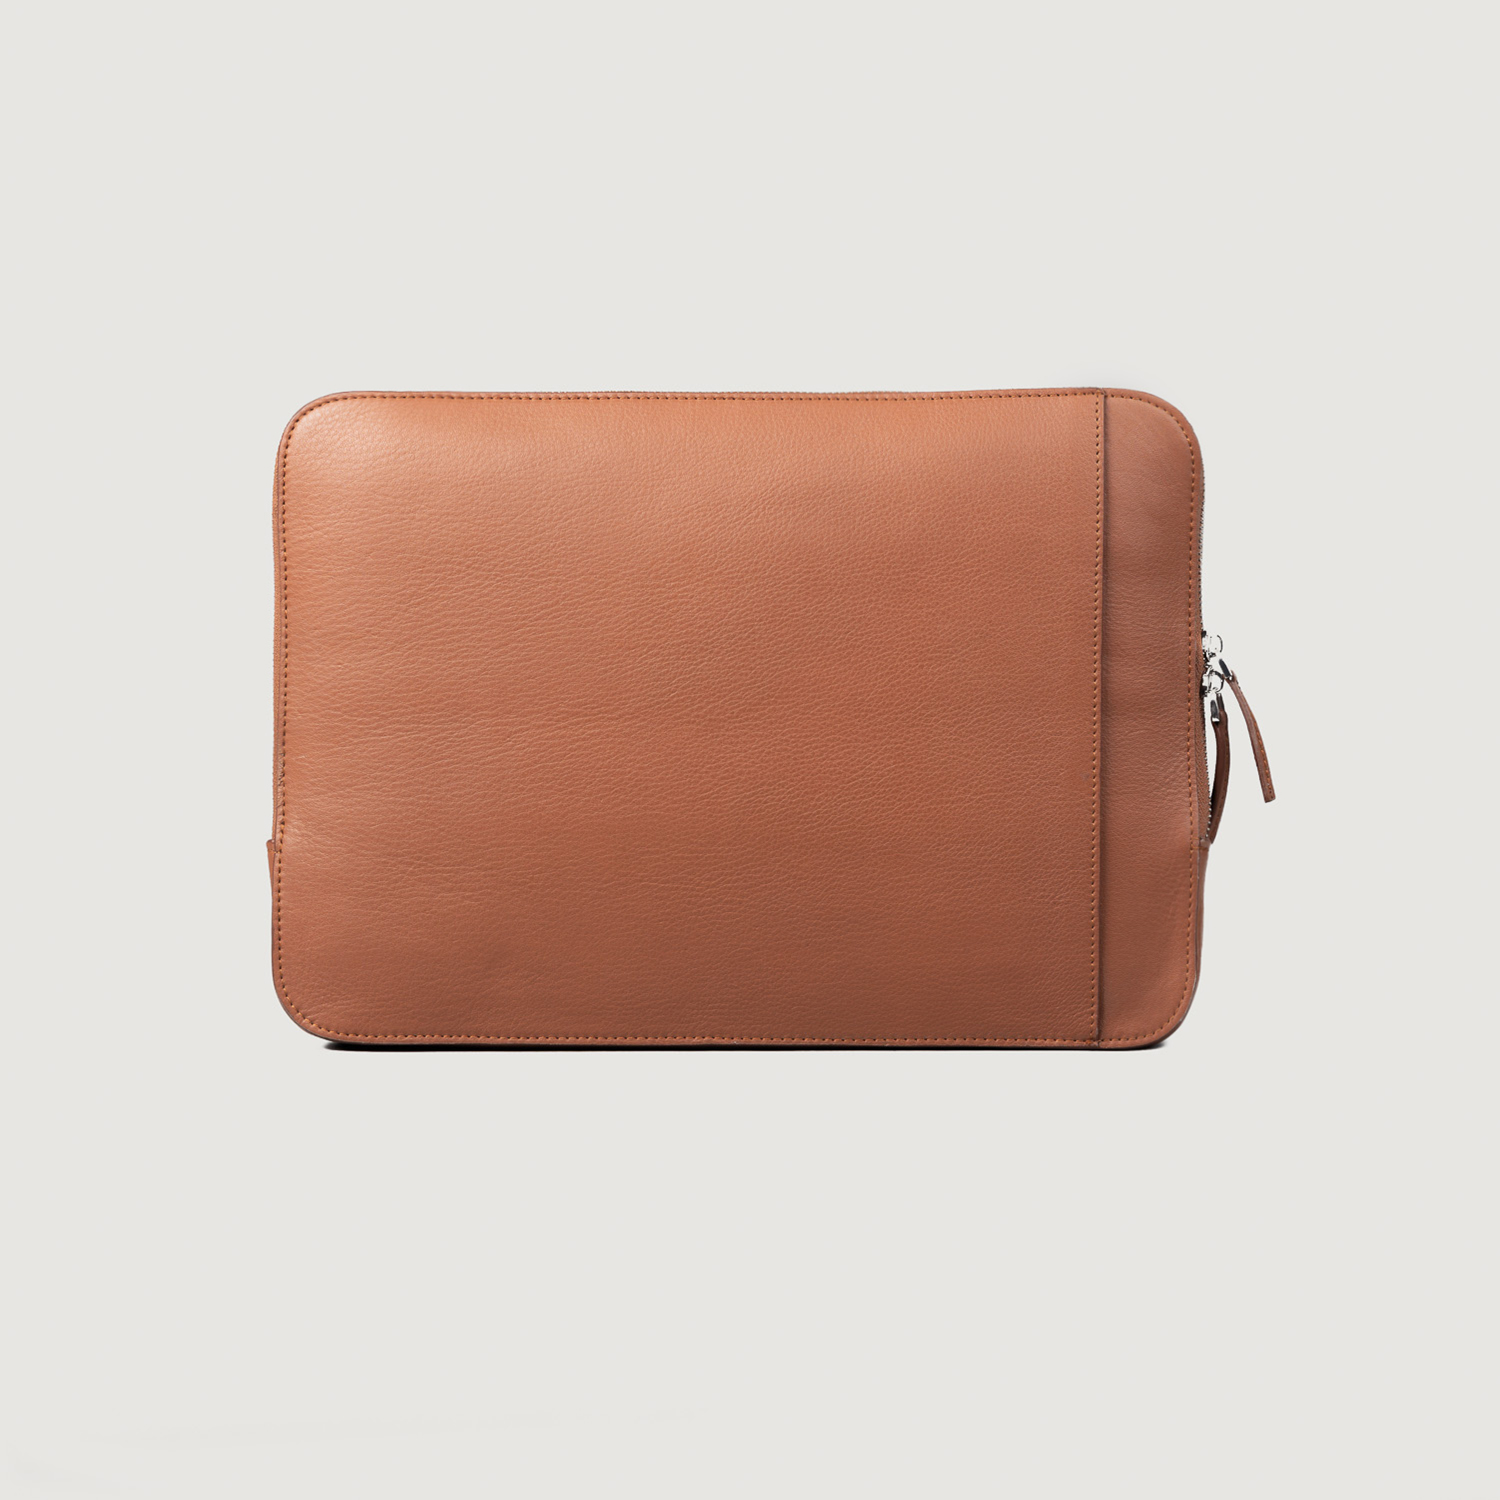 The Baxter Brown Leather Laptop Sleeve
